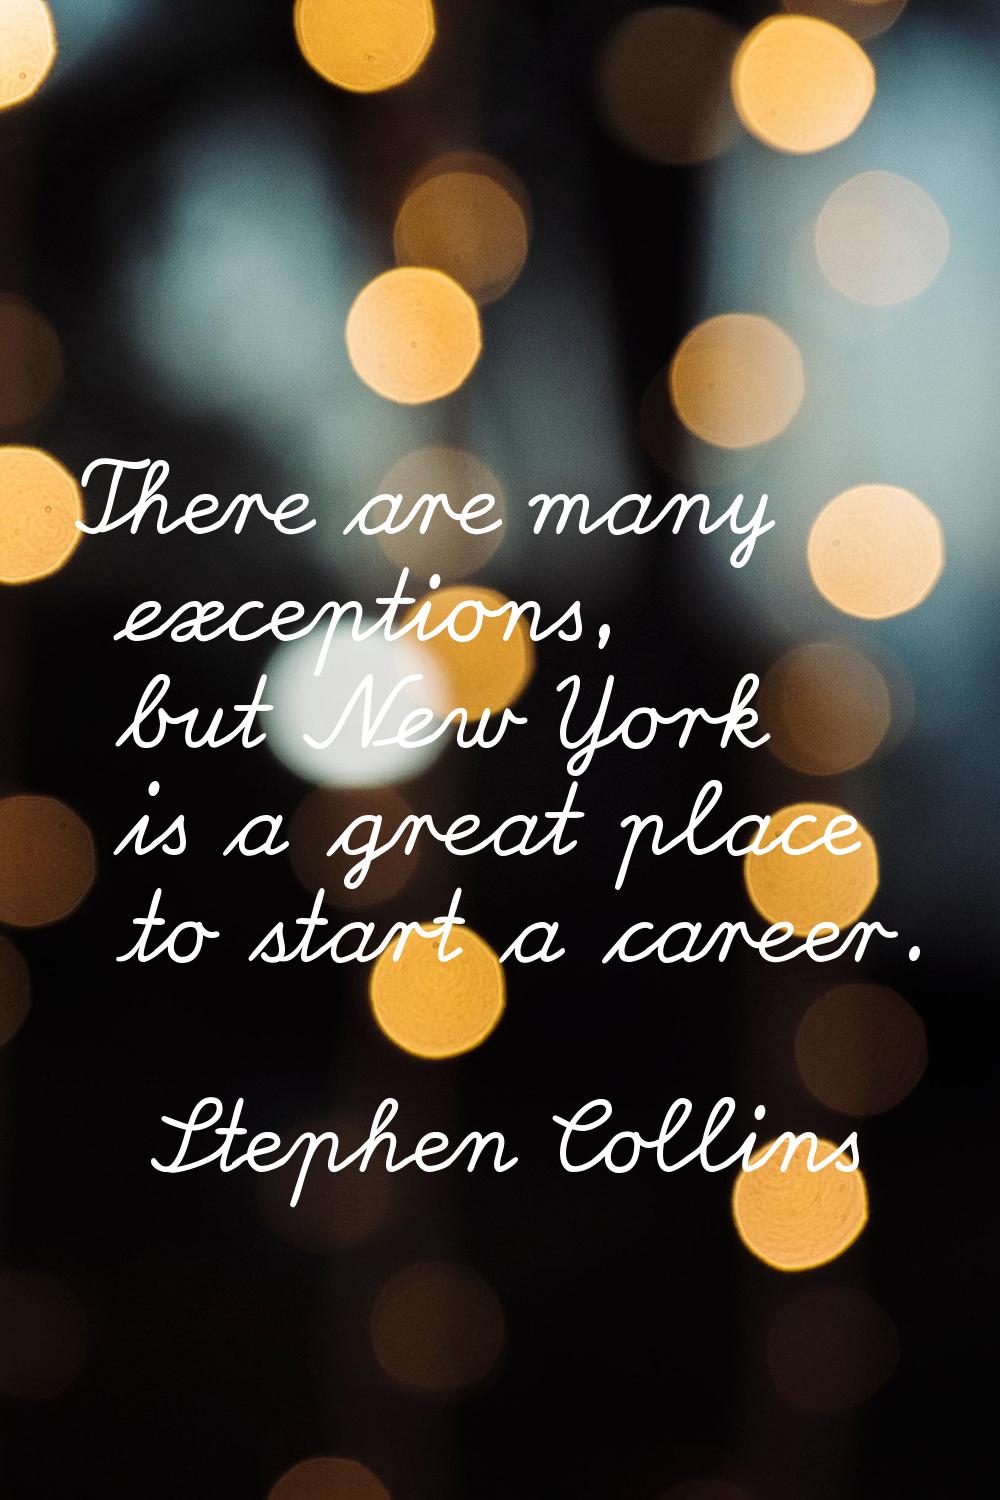 There are many exceptions, but New York is a great place to start a career.